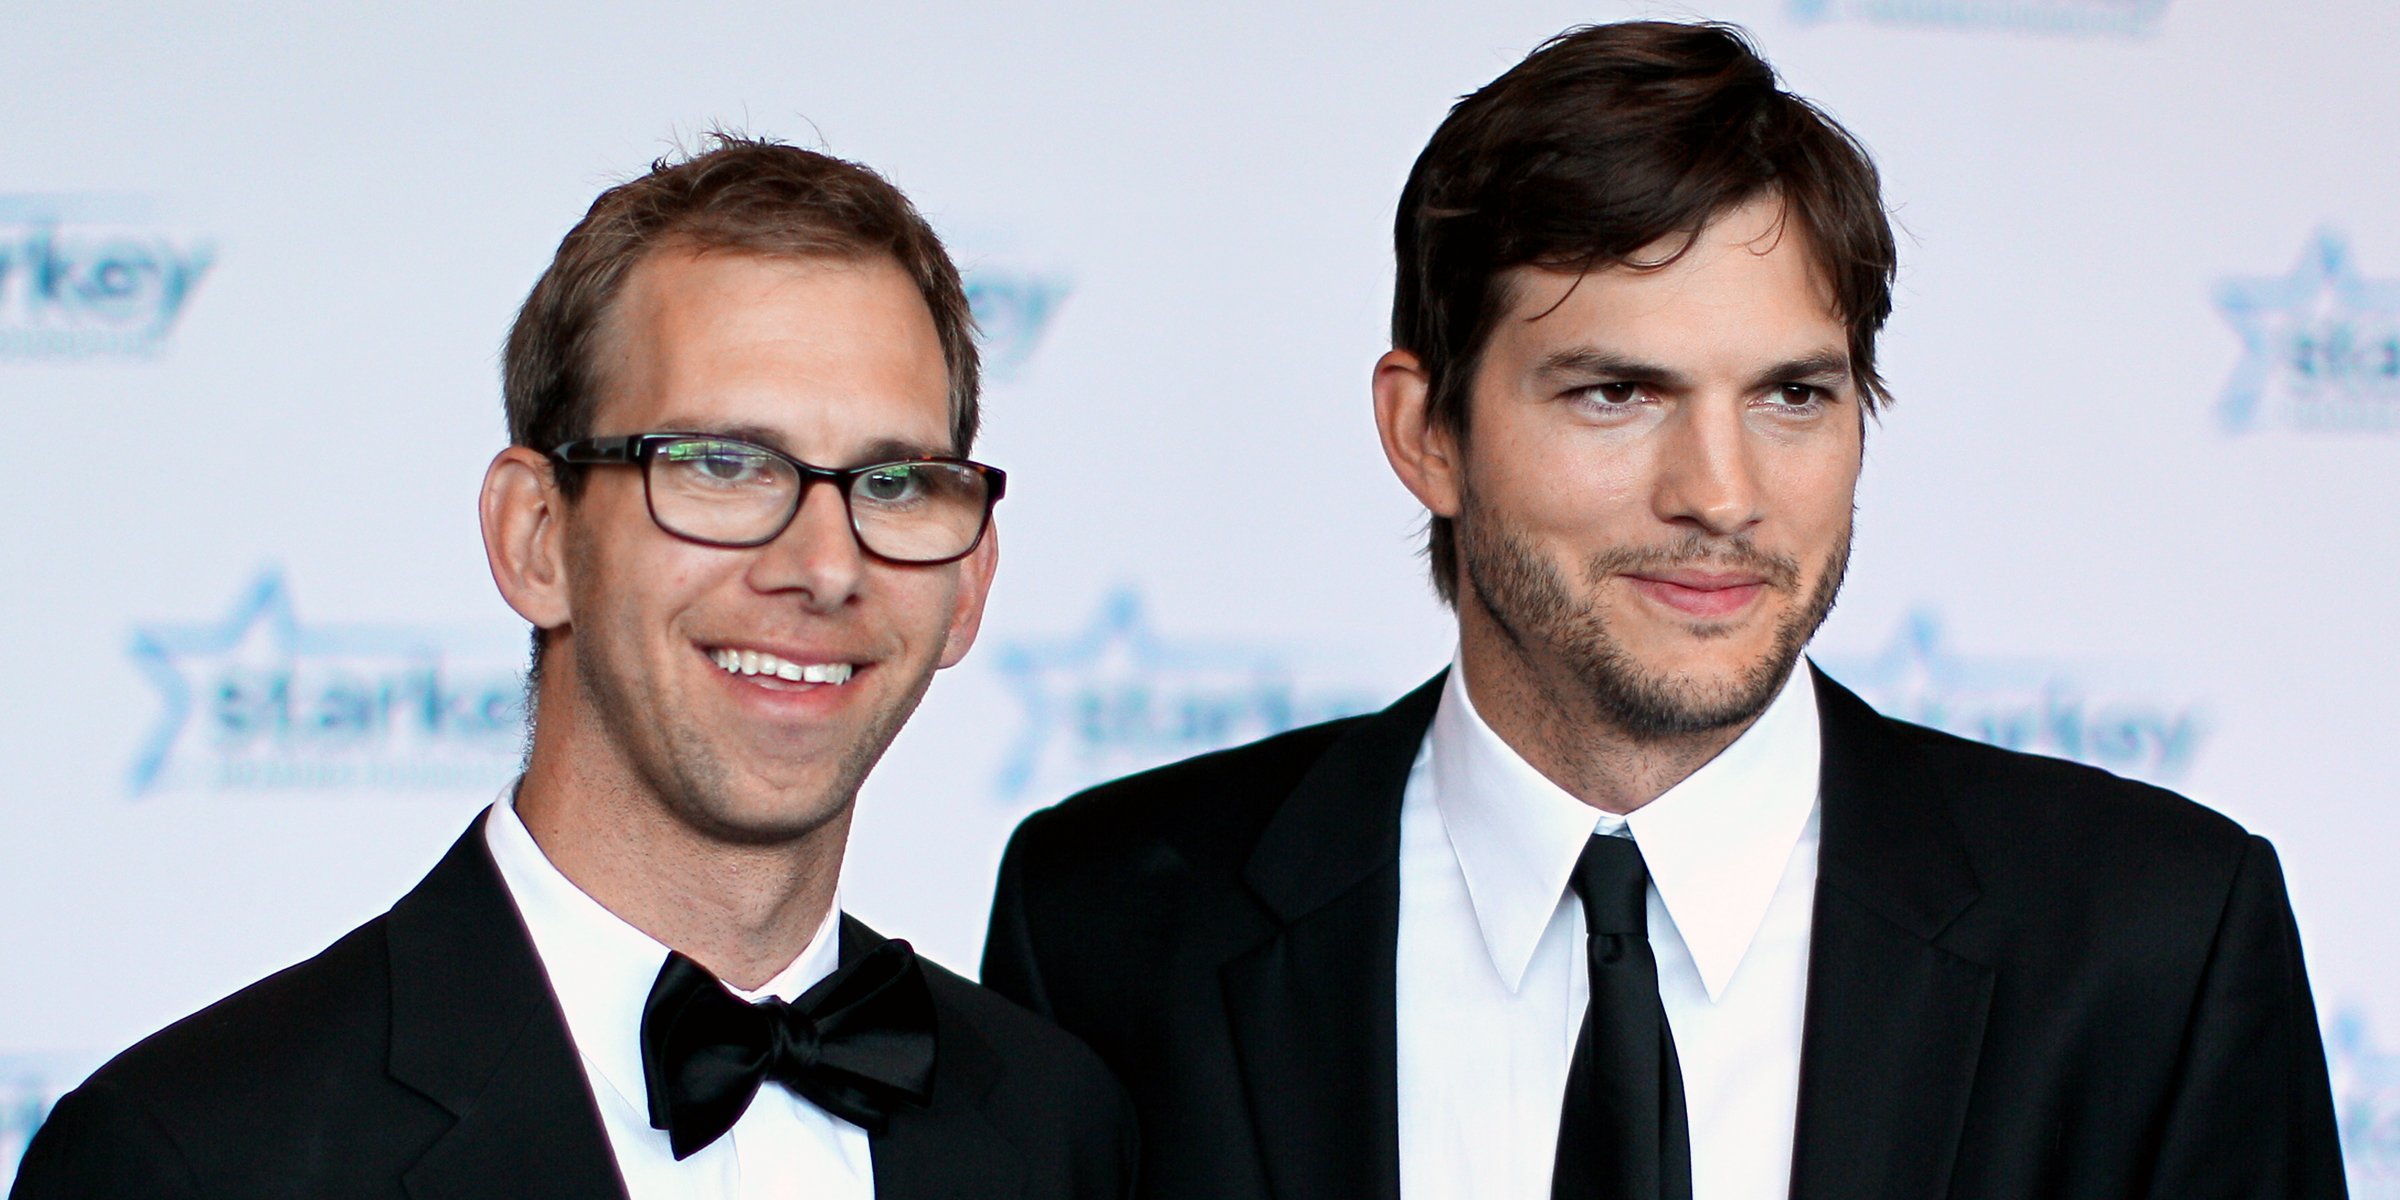 Ashton Kutcher and his brother Michael Kutcher. | Source: Getty Images